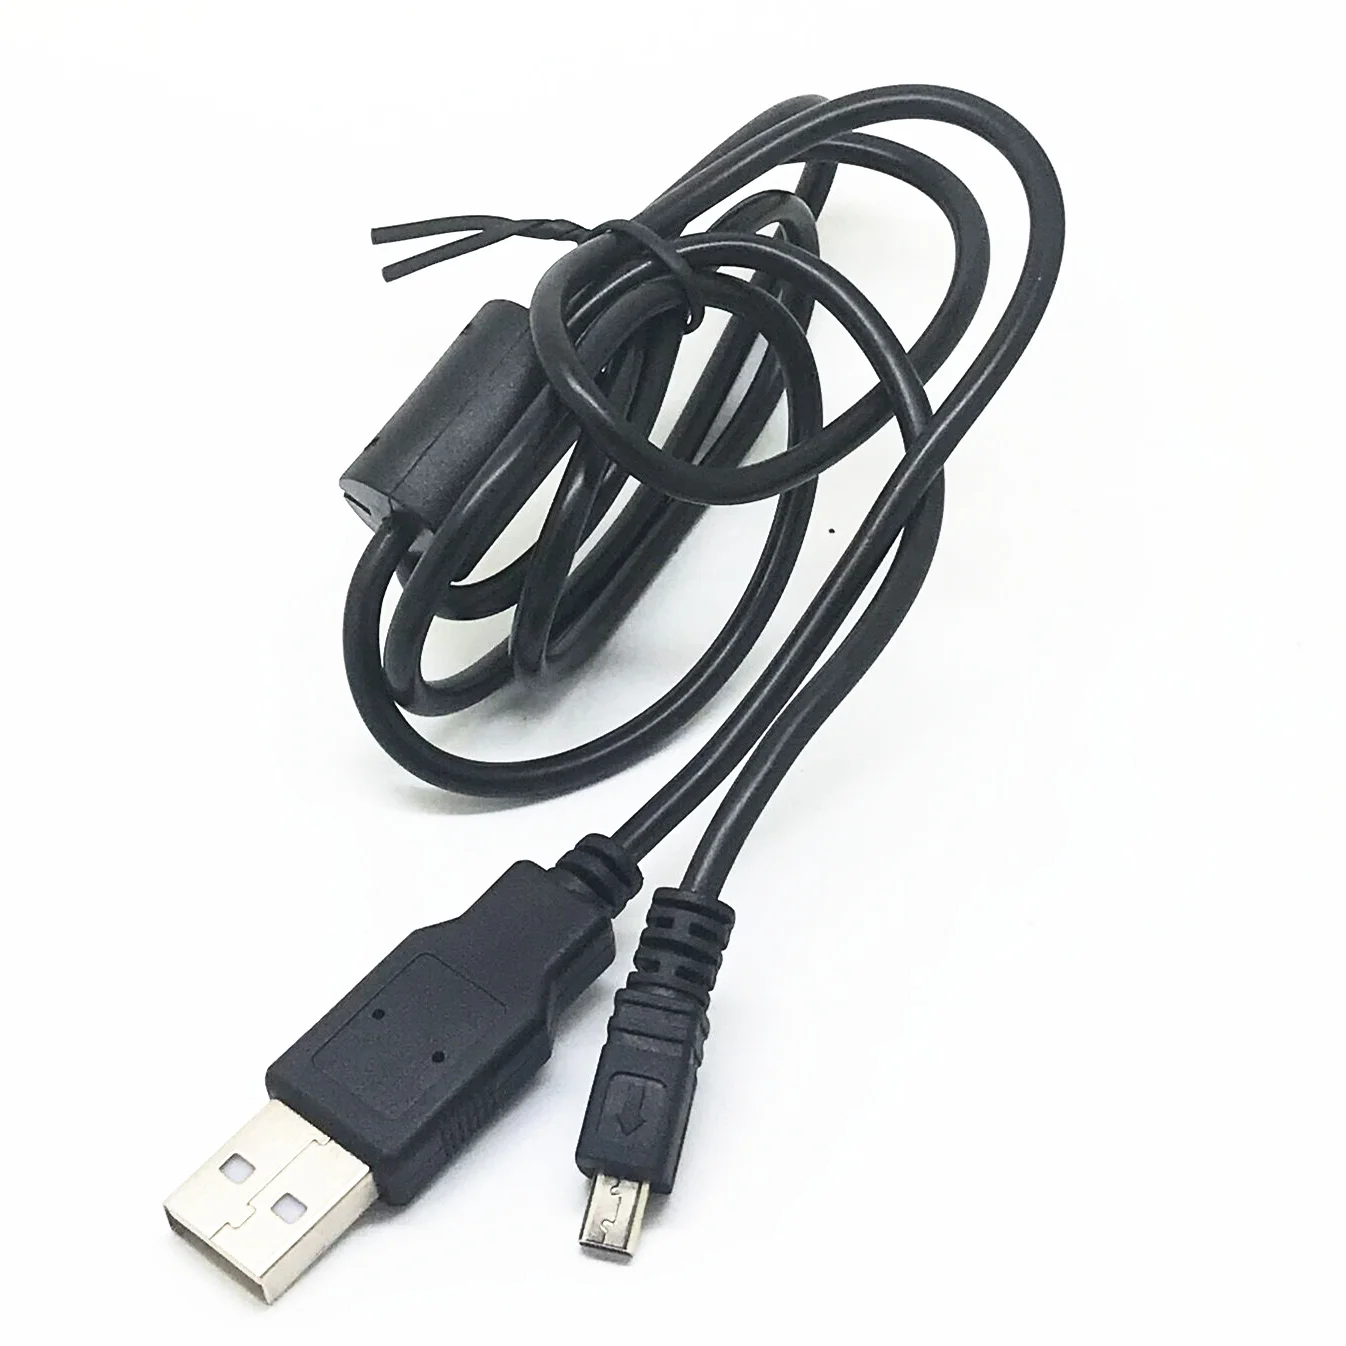  USB PC Sync Data Charging Cable for SIGMA DP1 Merrill DP1M  Mobile Phone Adapters &